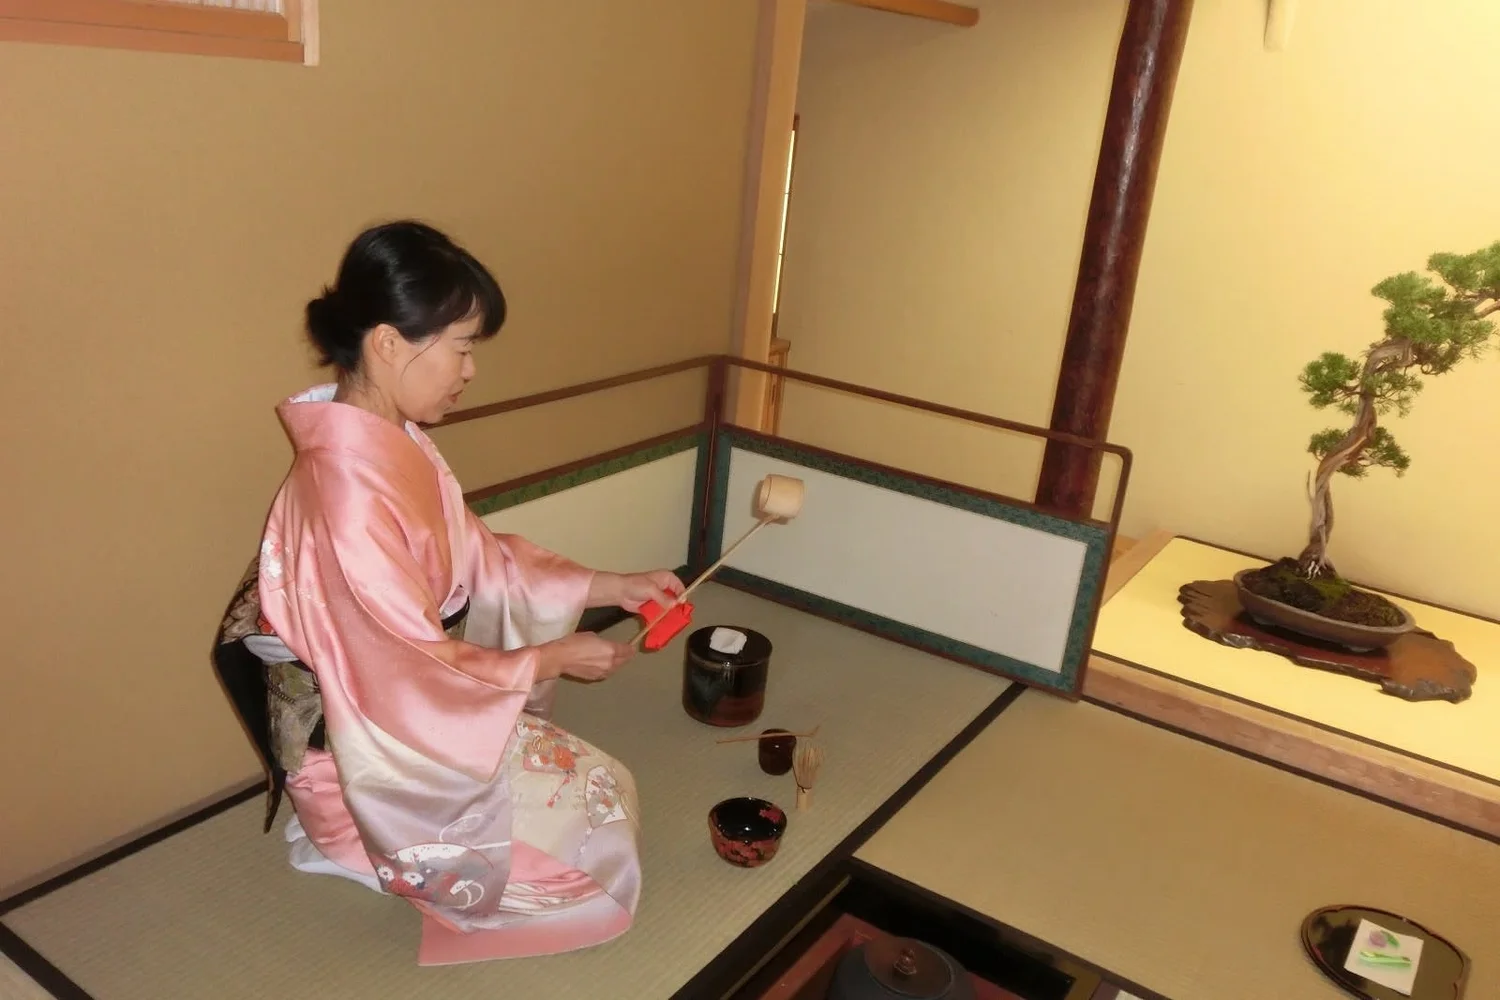 Experience a Tea Ceremony or Wearing Kimono at Bonsai Museum